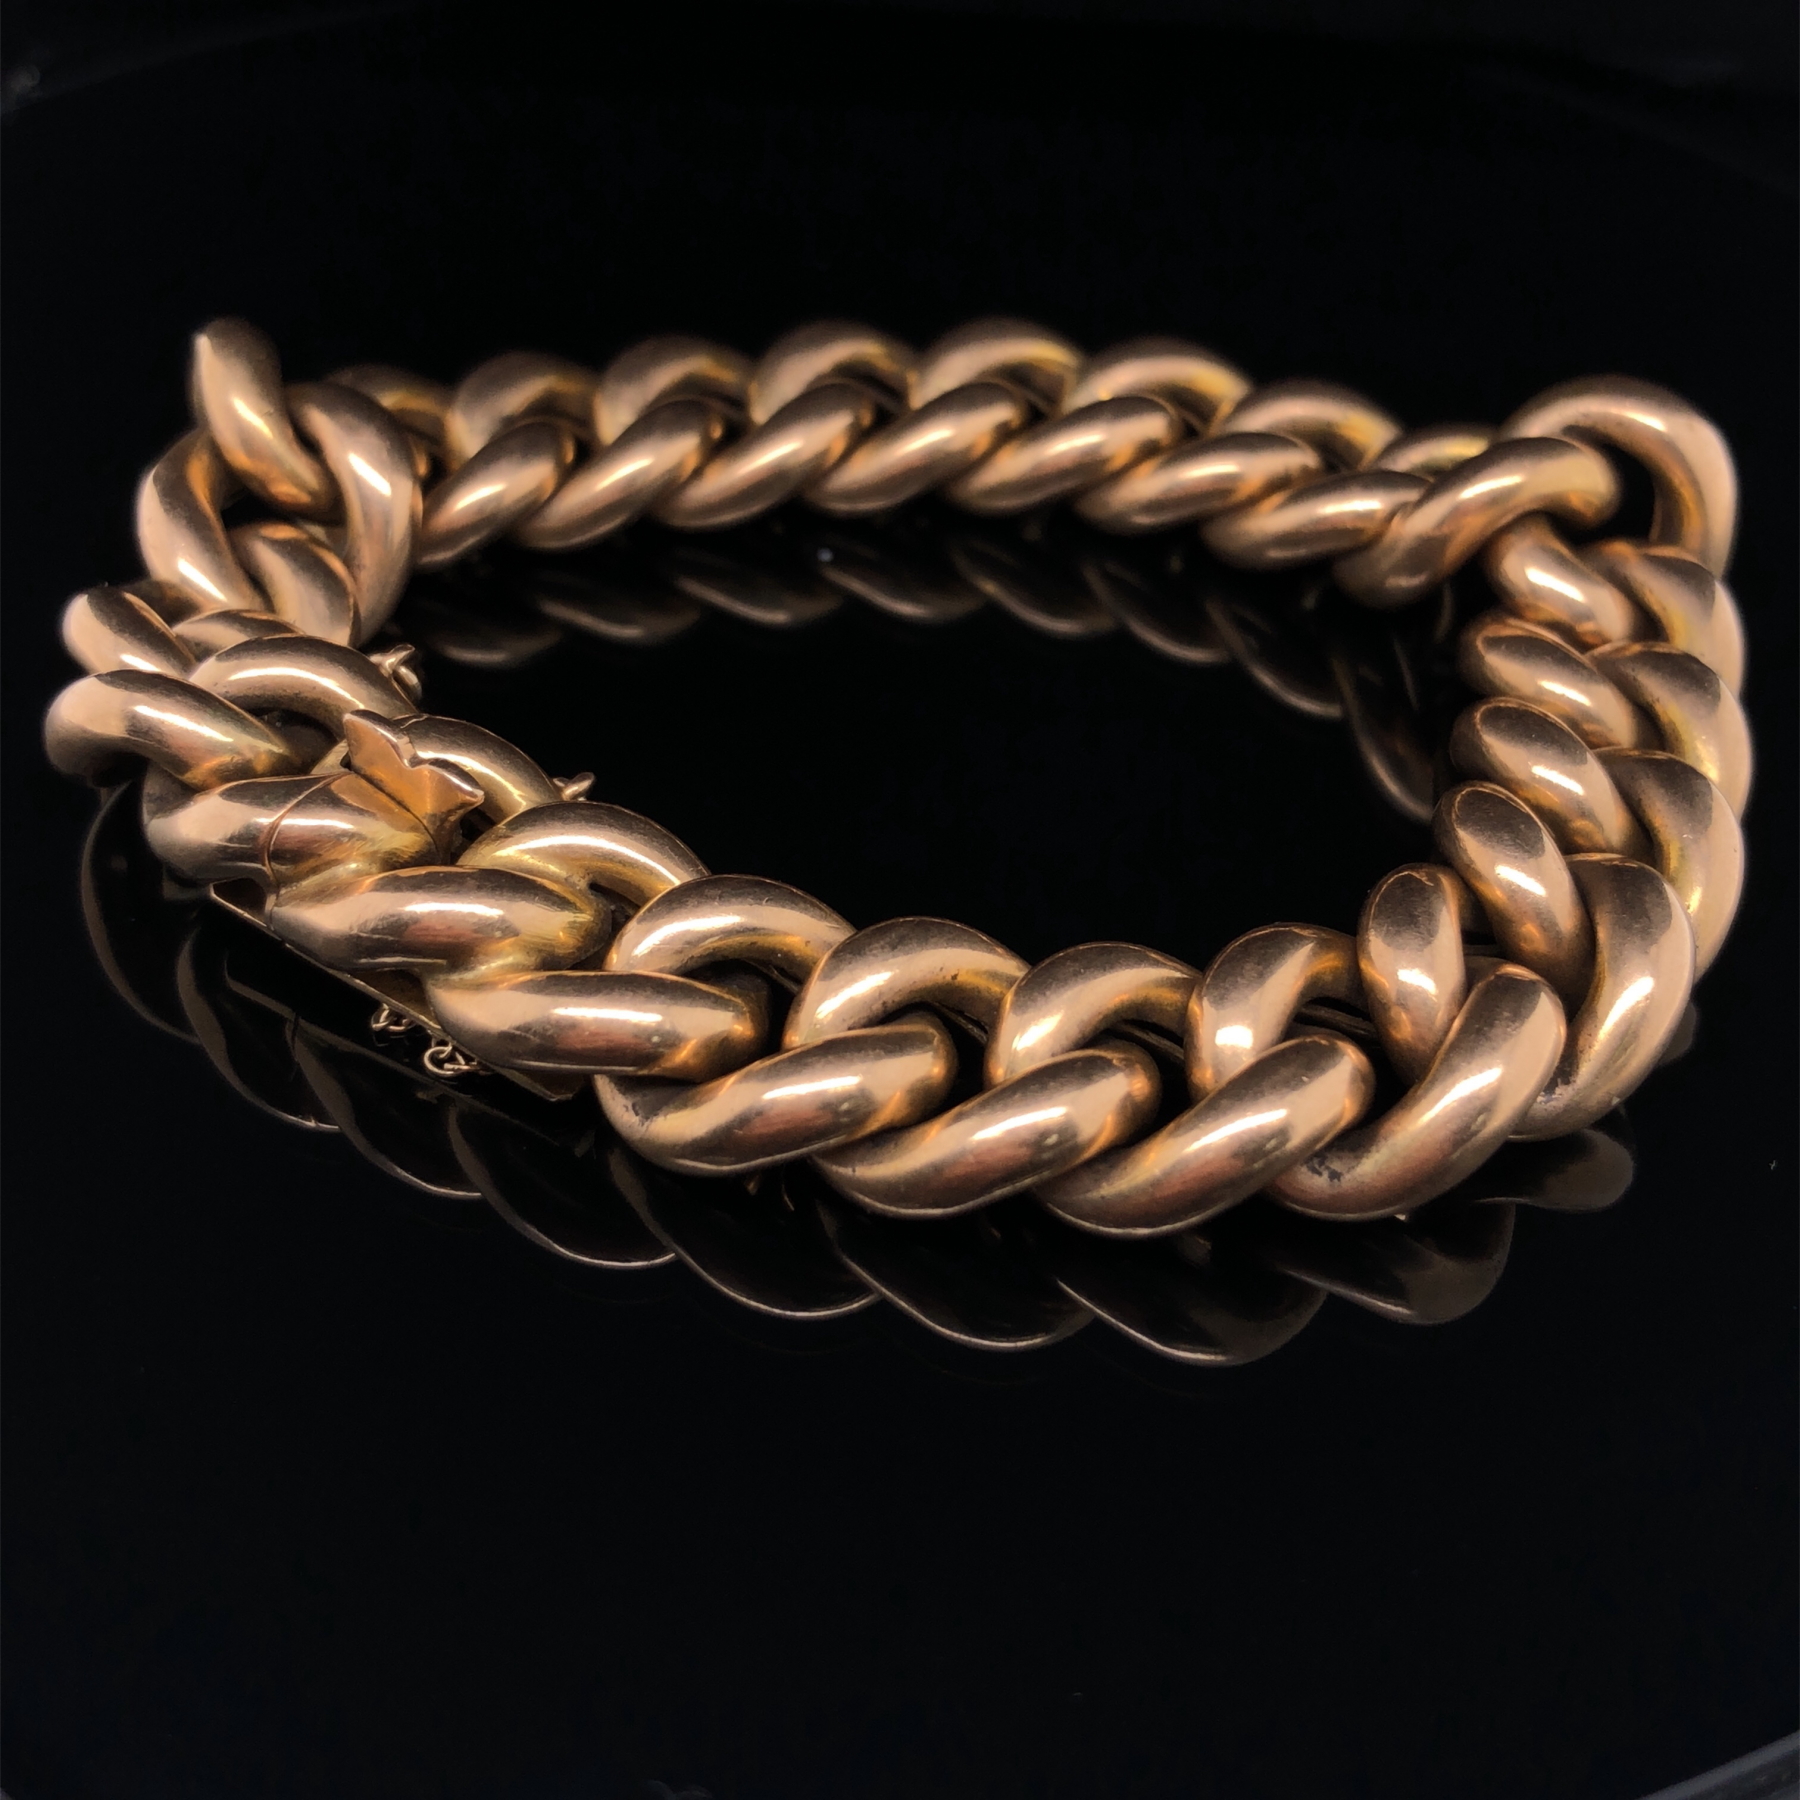 AN EDWARDIAN 15ct GOLD CURB BRACELET, COMPLETE WITH INTEGRAL CLASP AND SAFETY CHAIN. LENGTH APPROX - Image 2 of 5